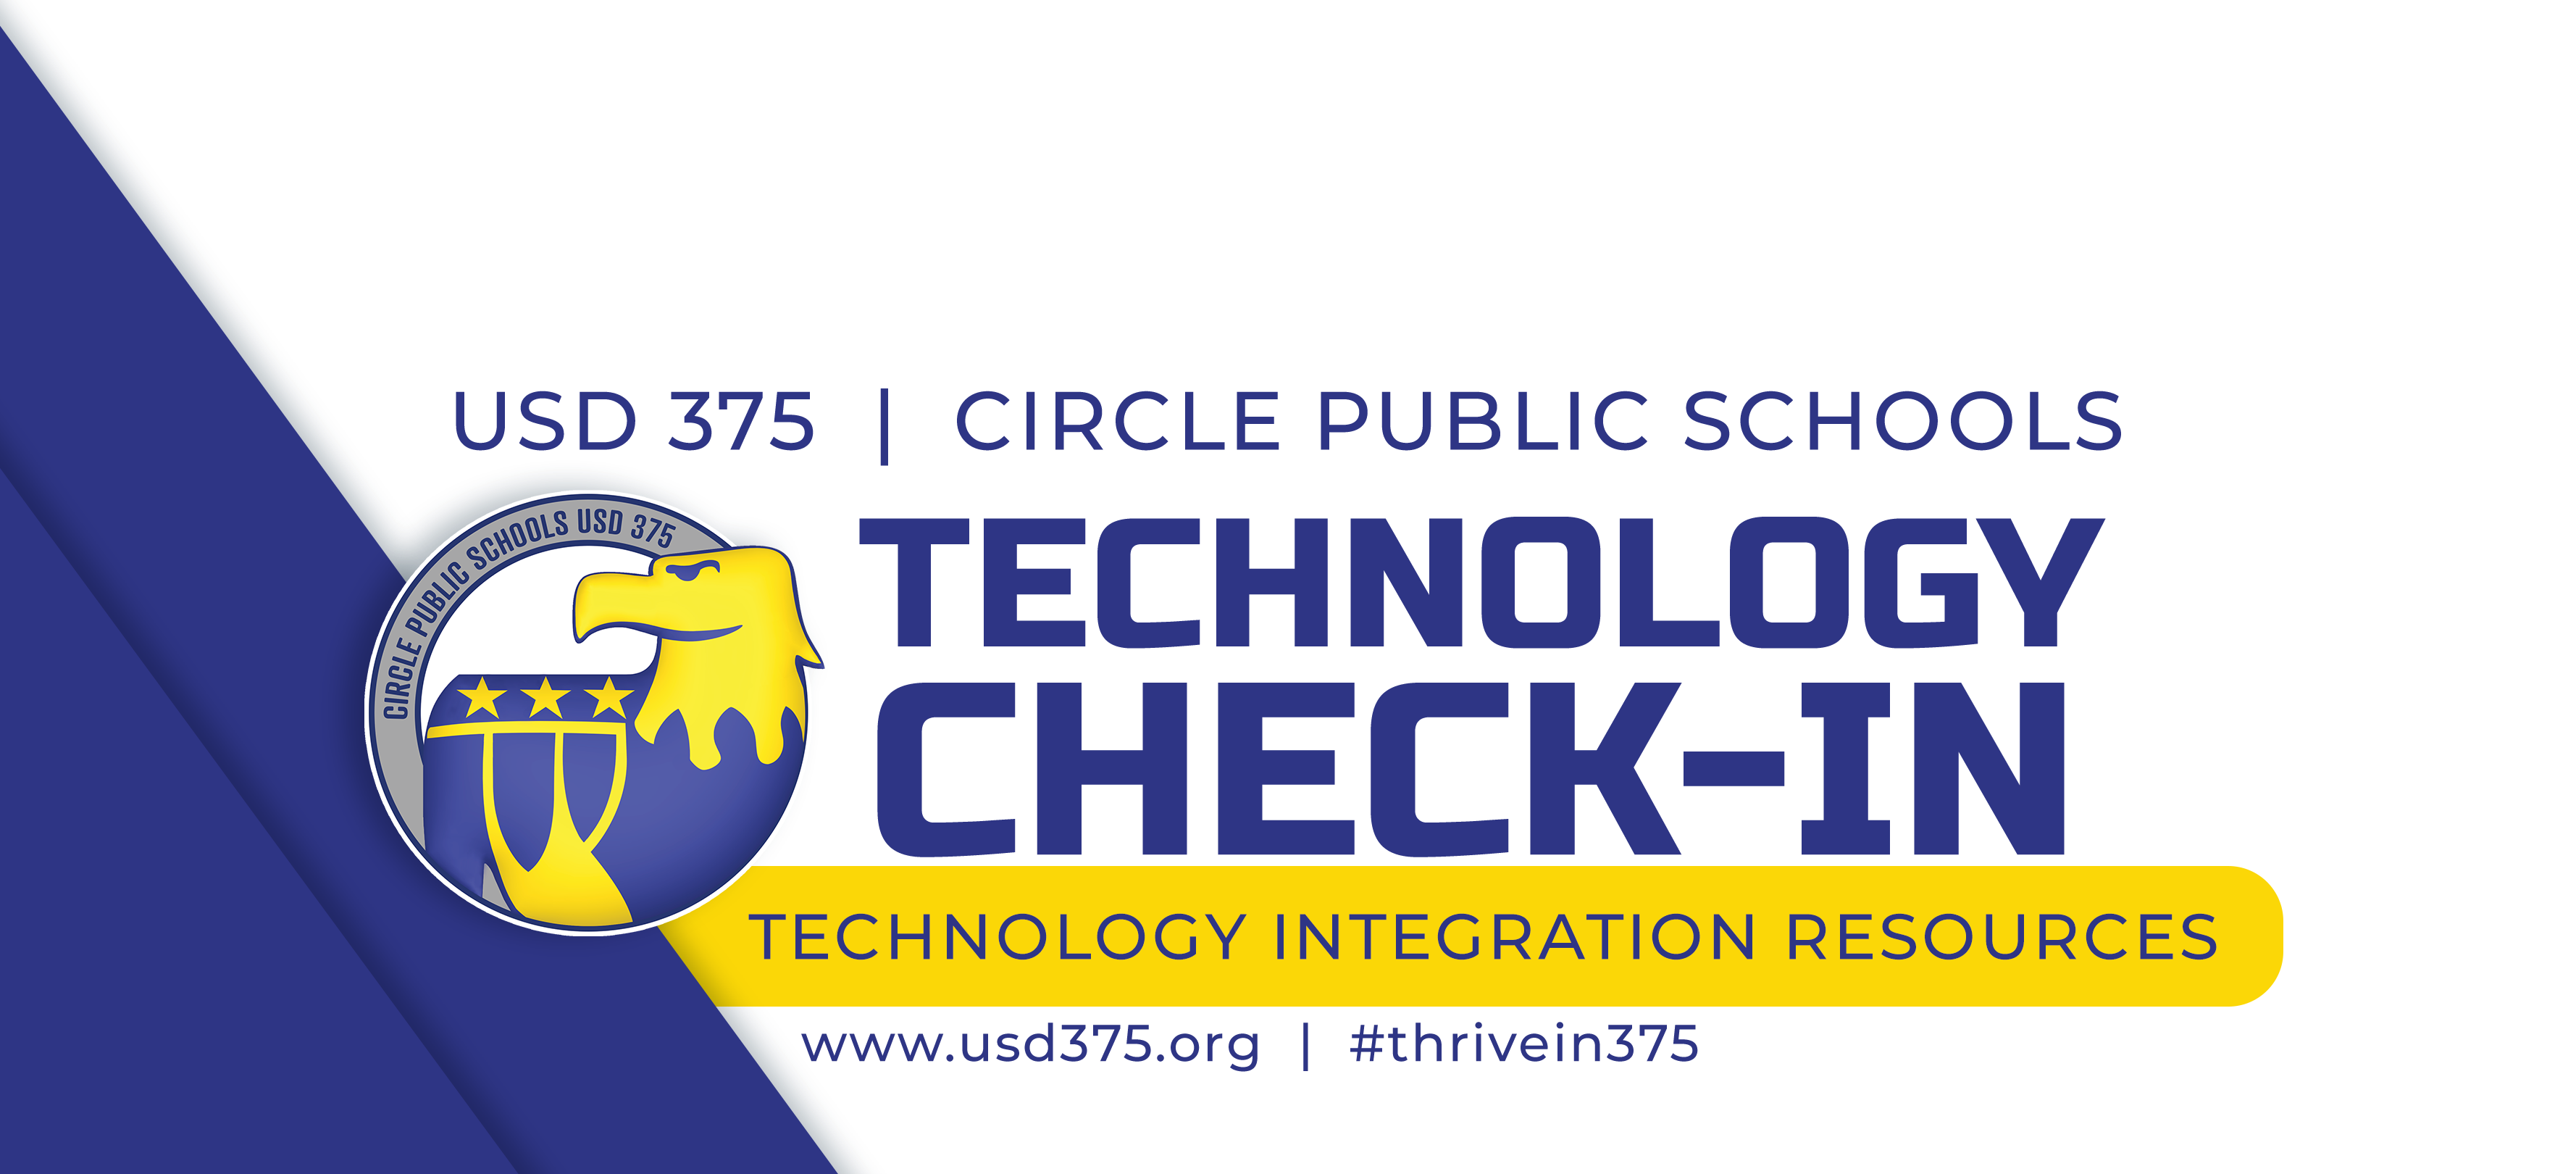 Instructional Technology Check-In